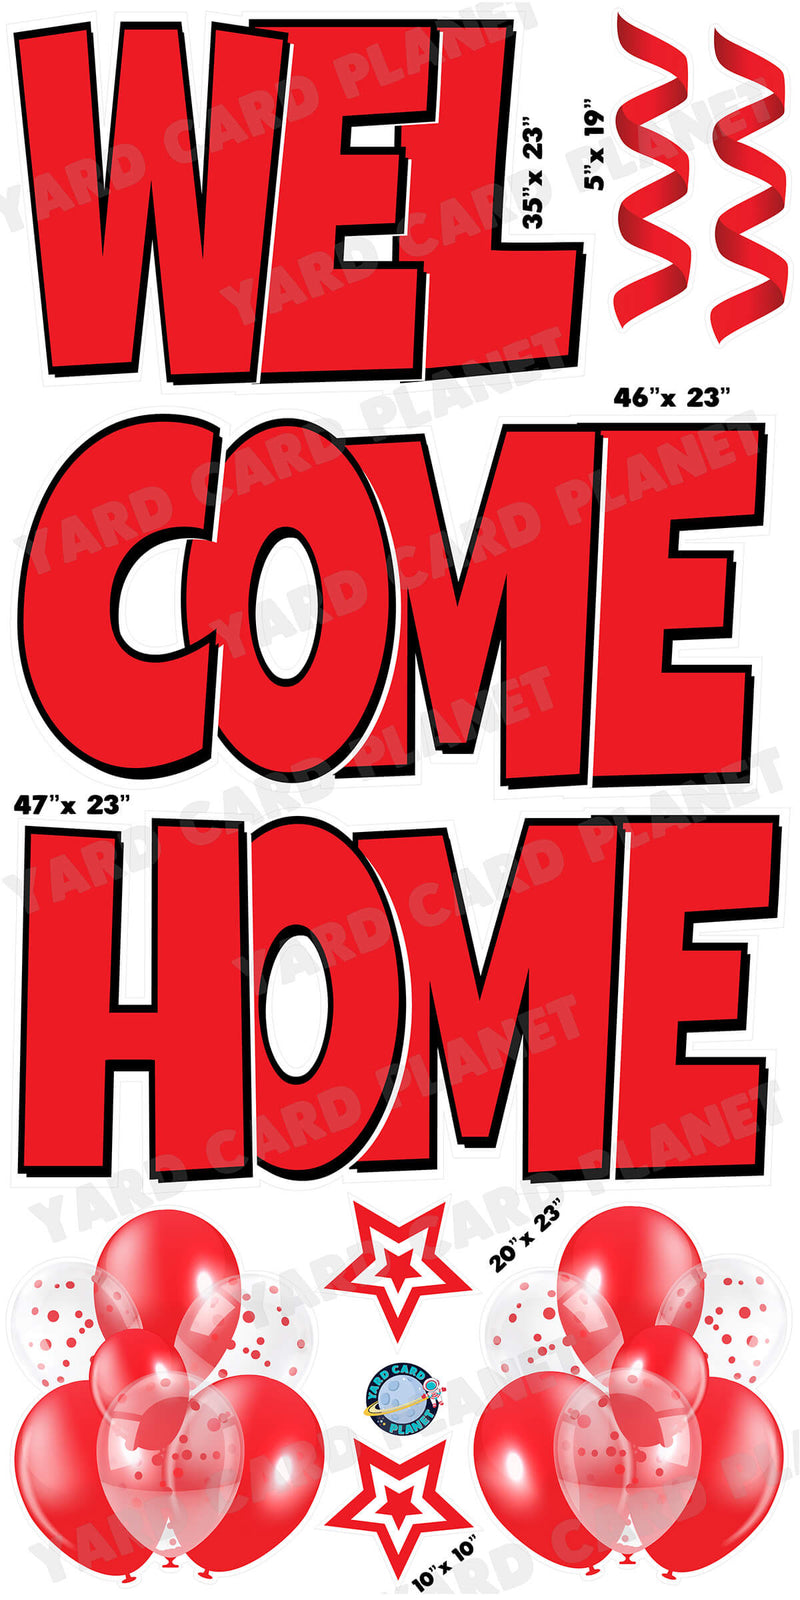 Large 23" Welcome Home Yard Card EZ Quick Sets in Luckiest Guy Font and Flair in Red Solid Color